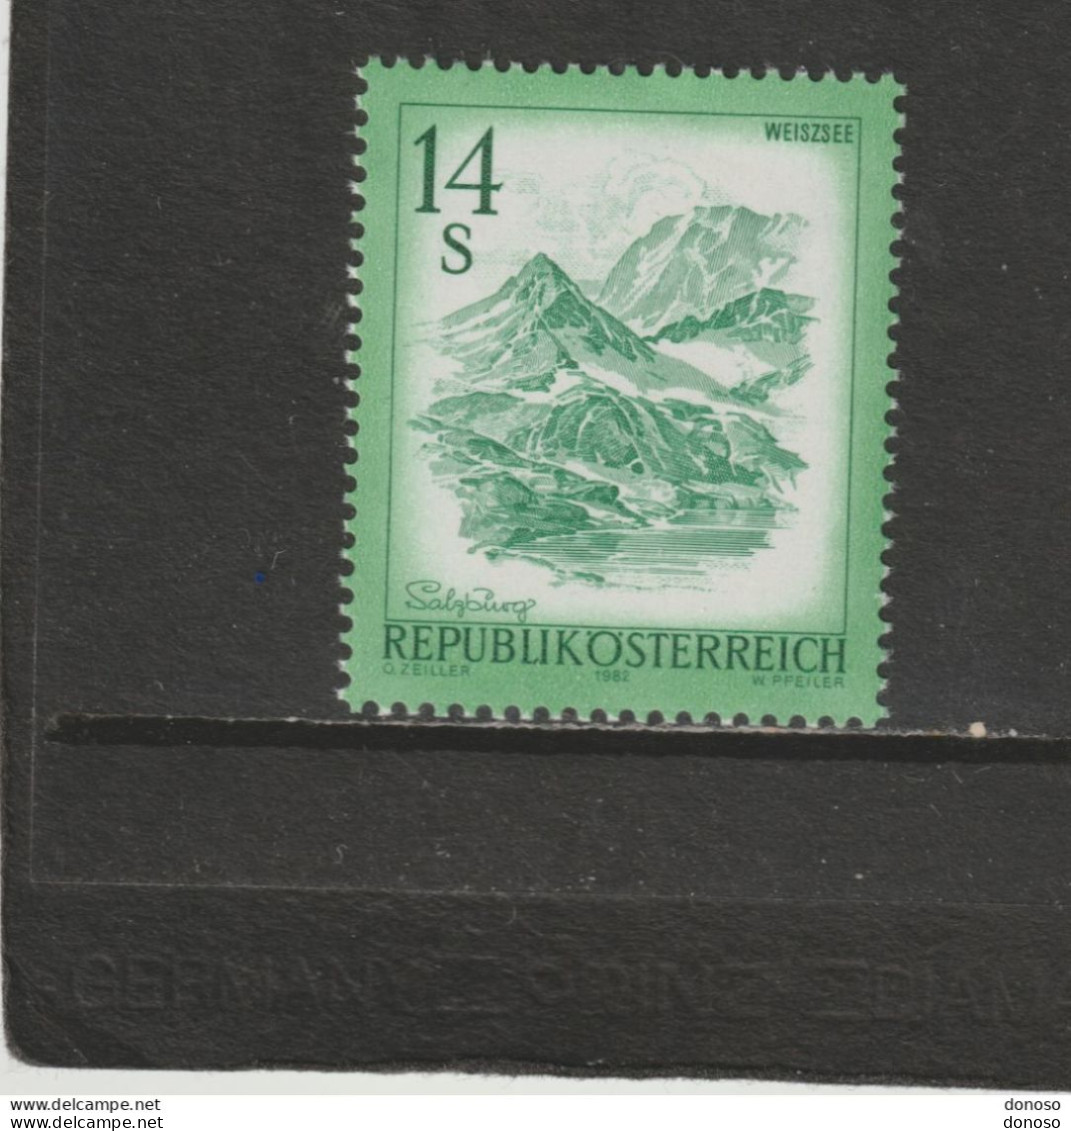 AUTRICHE 1982 Weissee Yvert 1525, Michel 1696 NEUF** MNH Cote 4 Euros - Unused Stamps